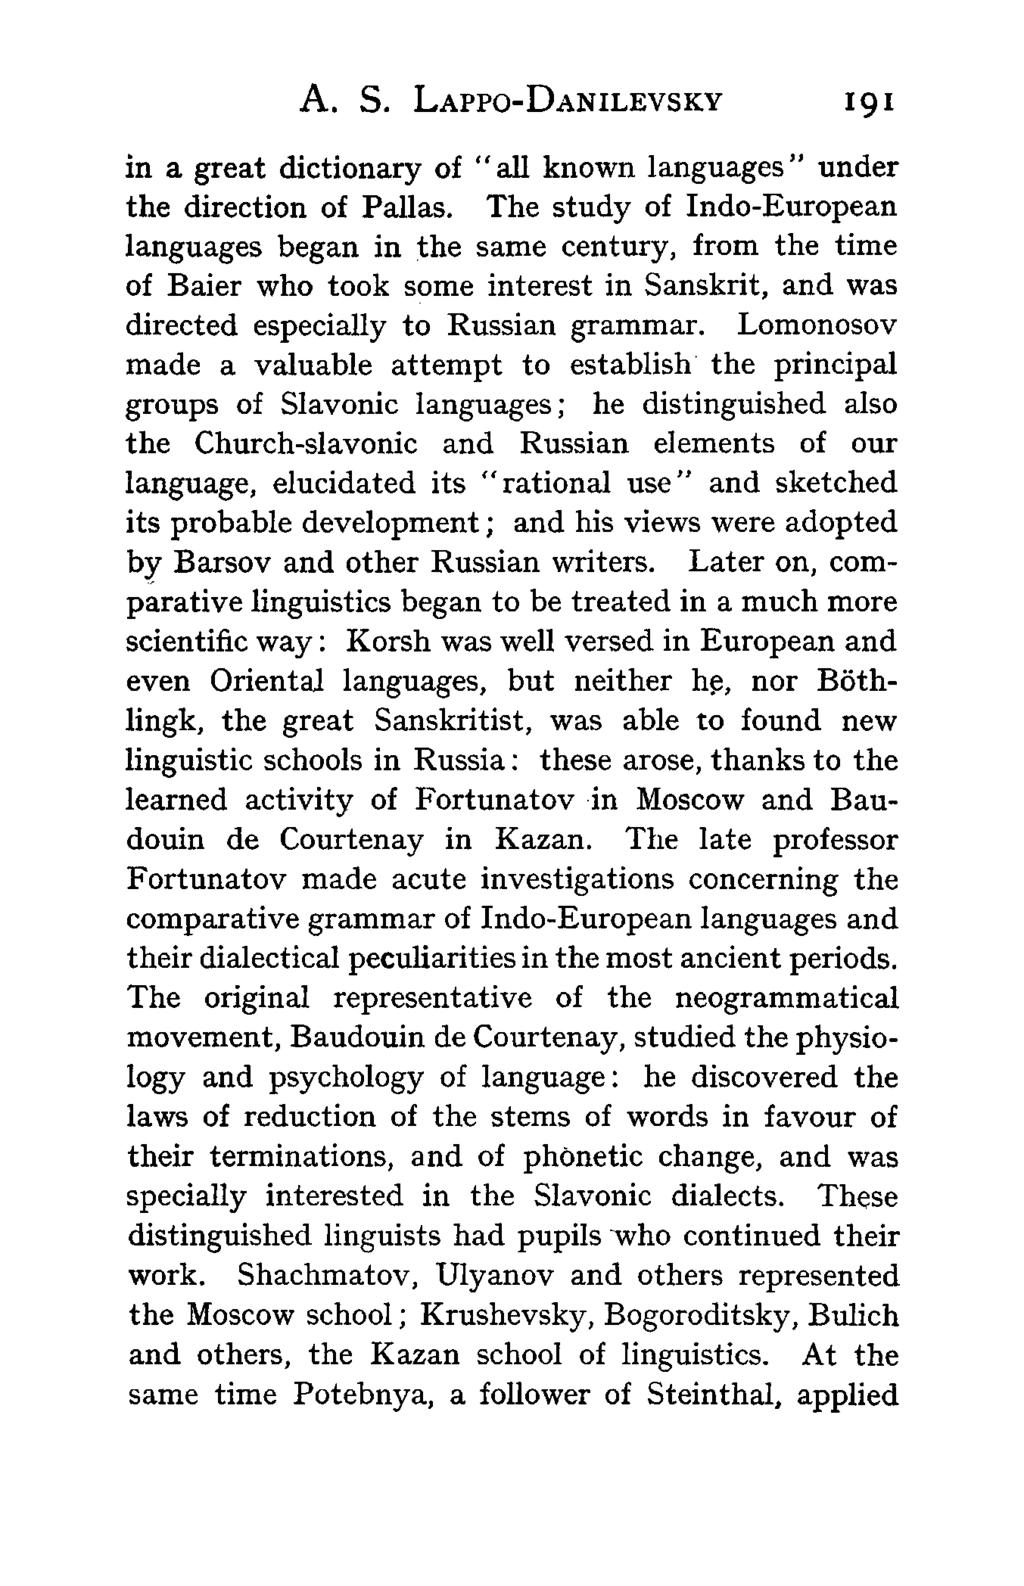 A. S. LAPPO-DANILEVSKY 191 in a great dictionary of "all known languages" under the direction of Pallas.